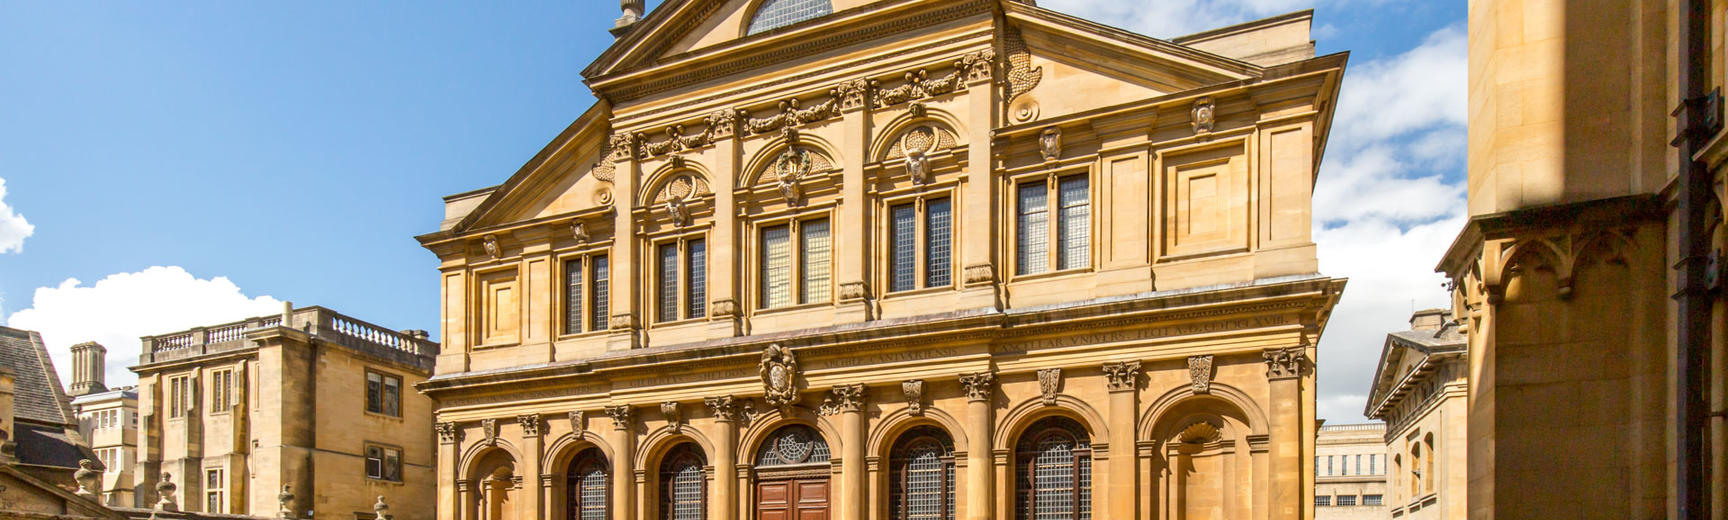 External photo of the Sheldonian Theatre with sunshine reflecting on the front